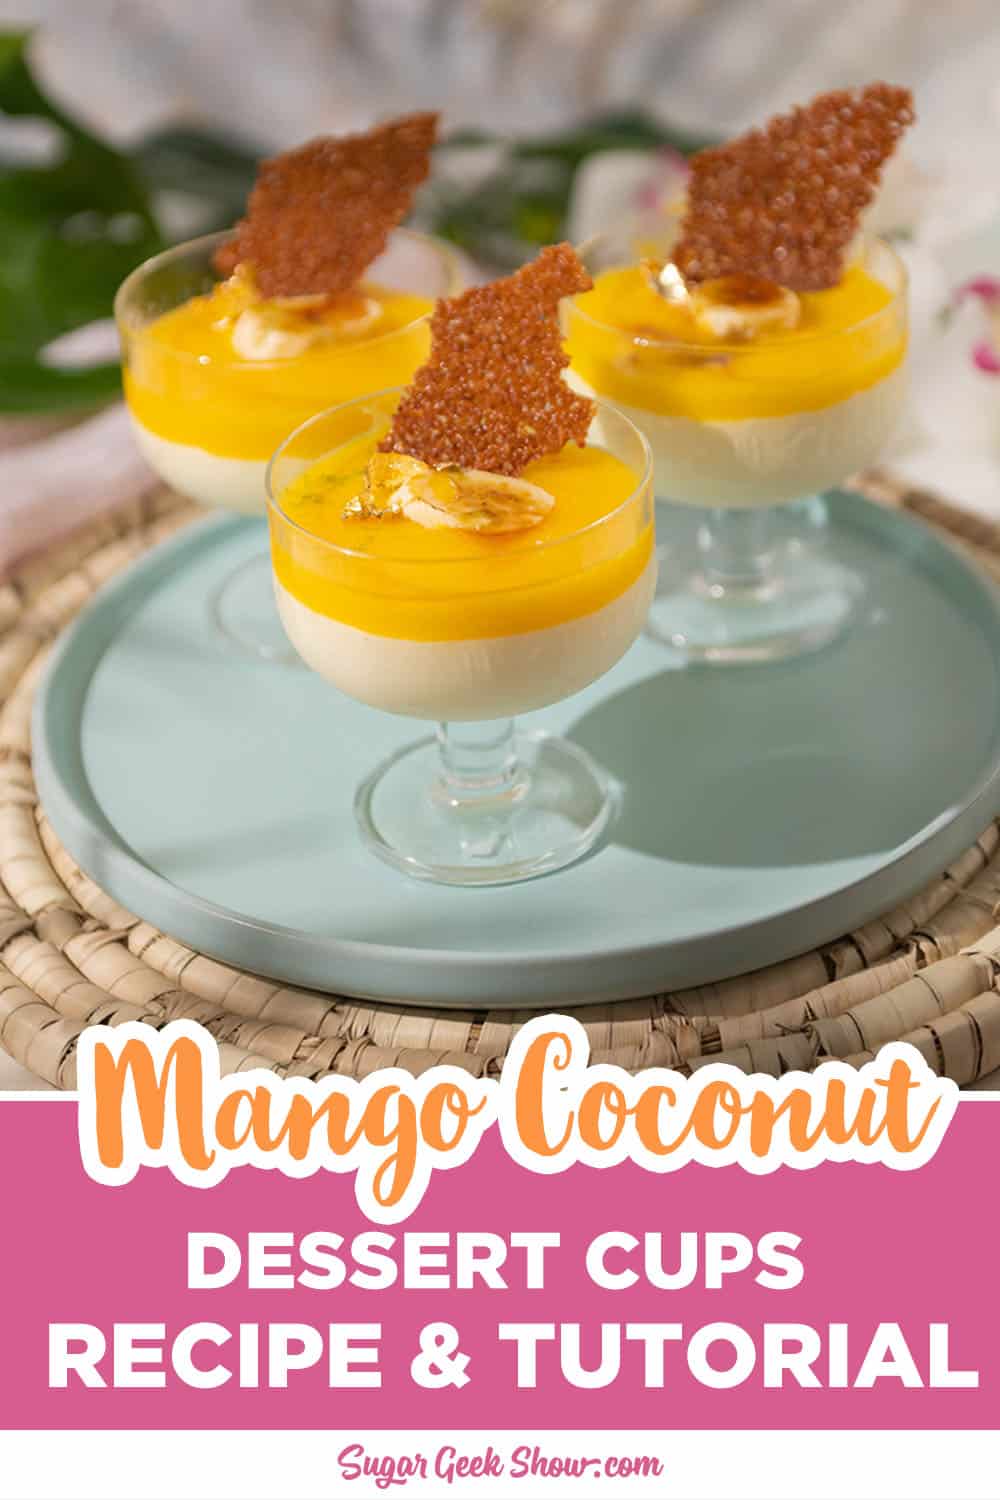 Coconut Mousse Cups with Mango Puree and Crunchy Tuille